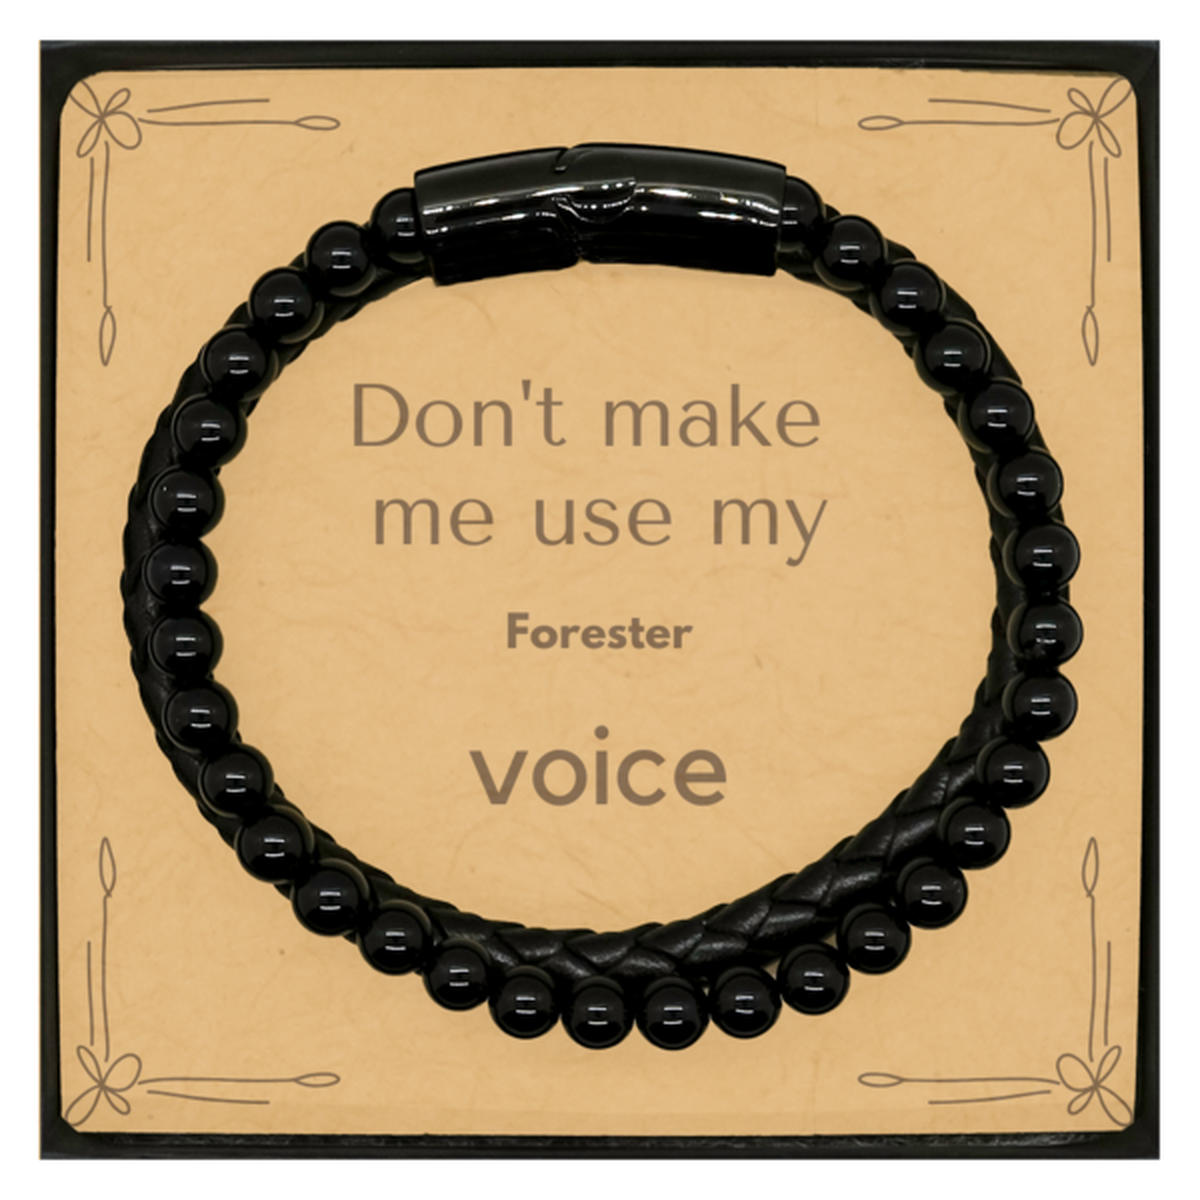 Don't make me use my Forester voice, Sarcasm Forester Card Gifts, Christmas Forester Stone Leather Bracelets Birthday Unique Gifts For Forester Coworkers, Men, Women, Colleague, Friends